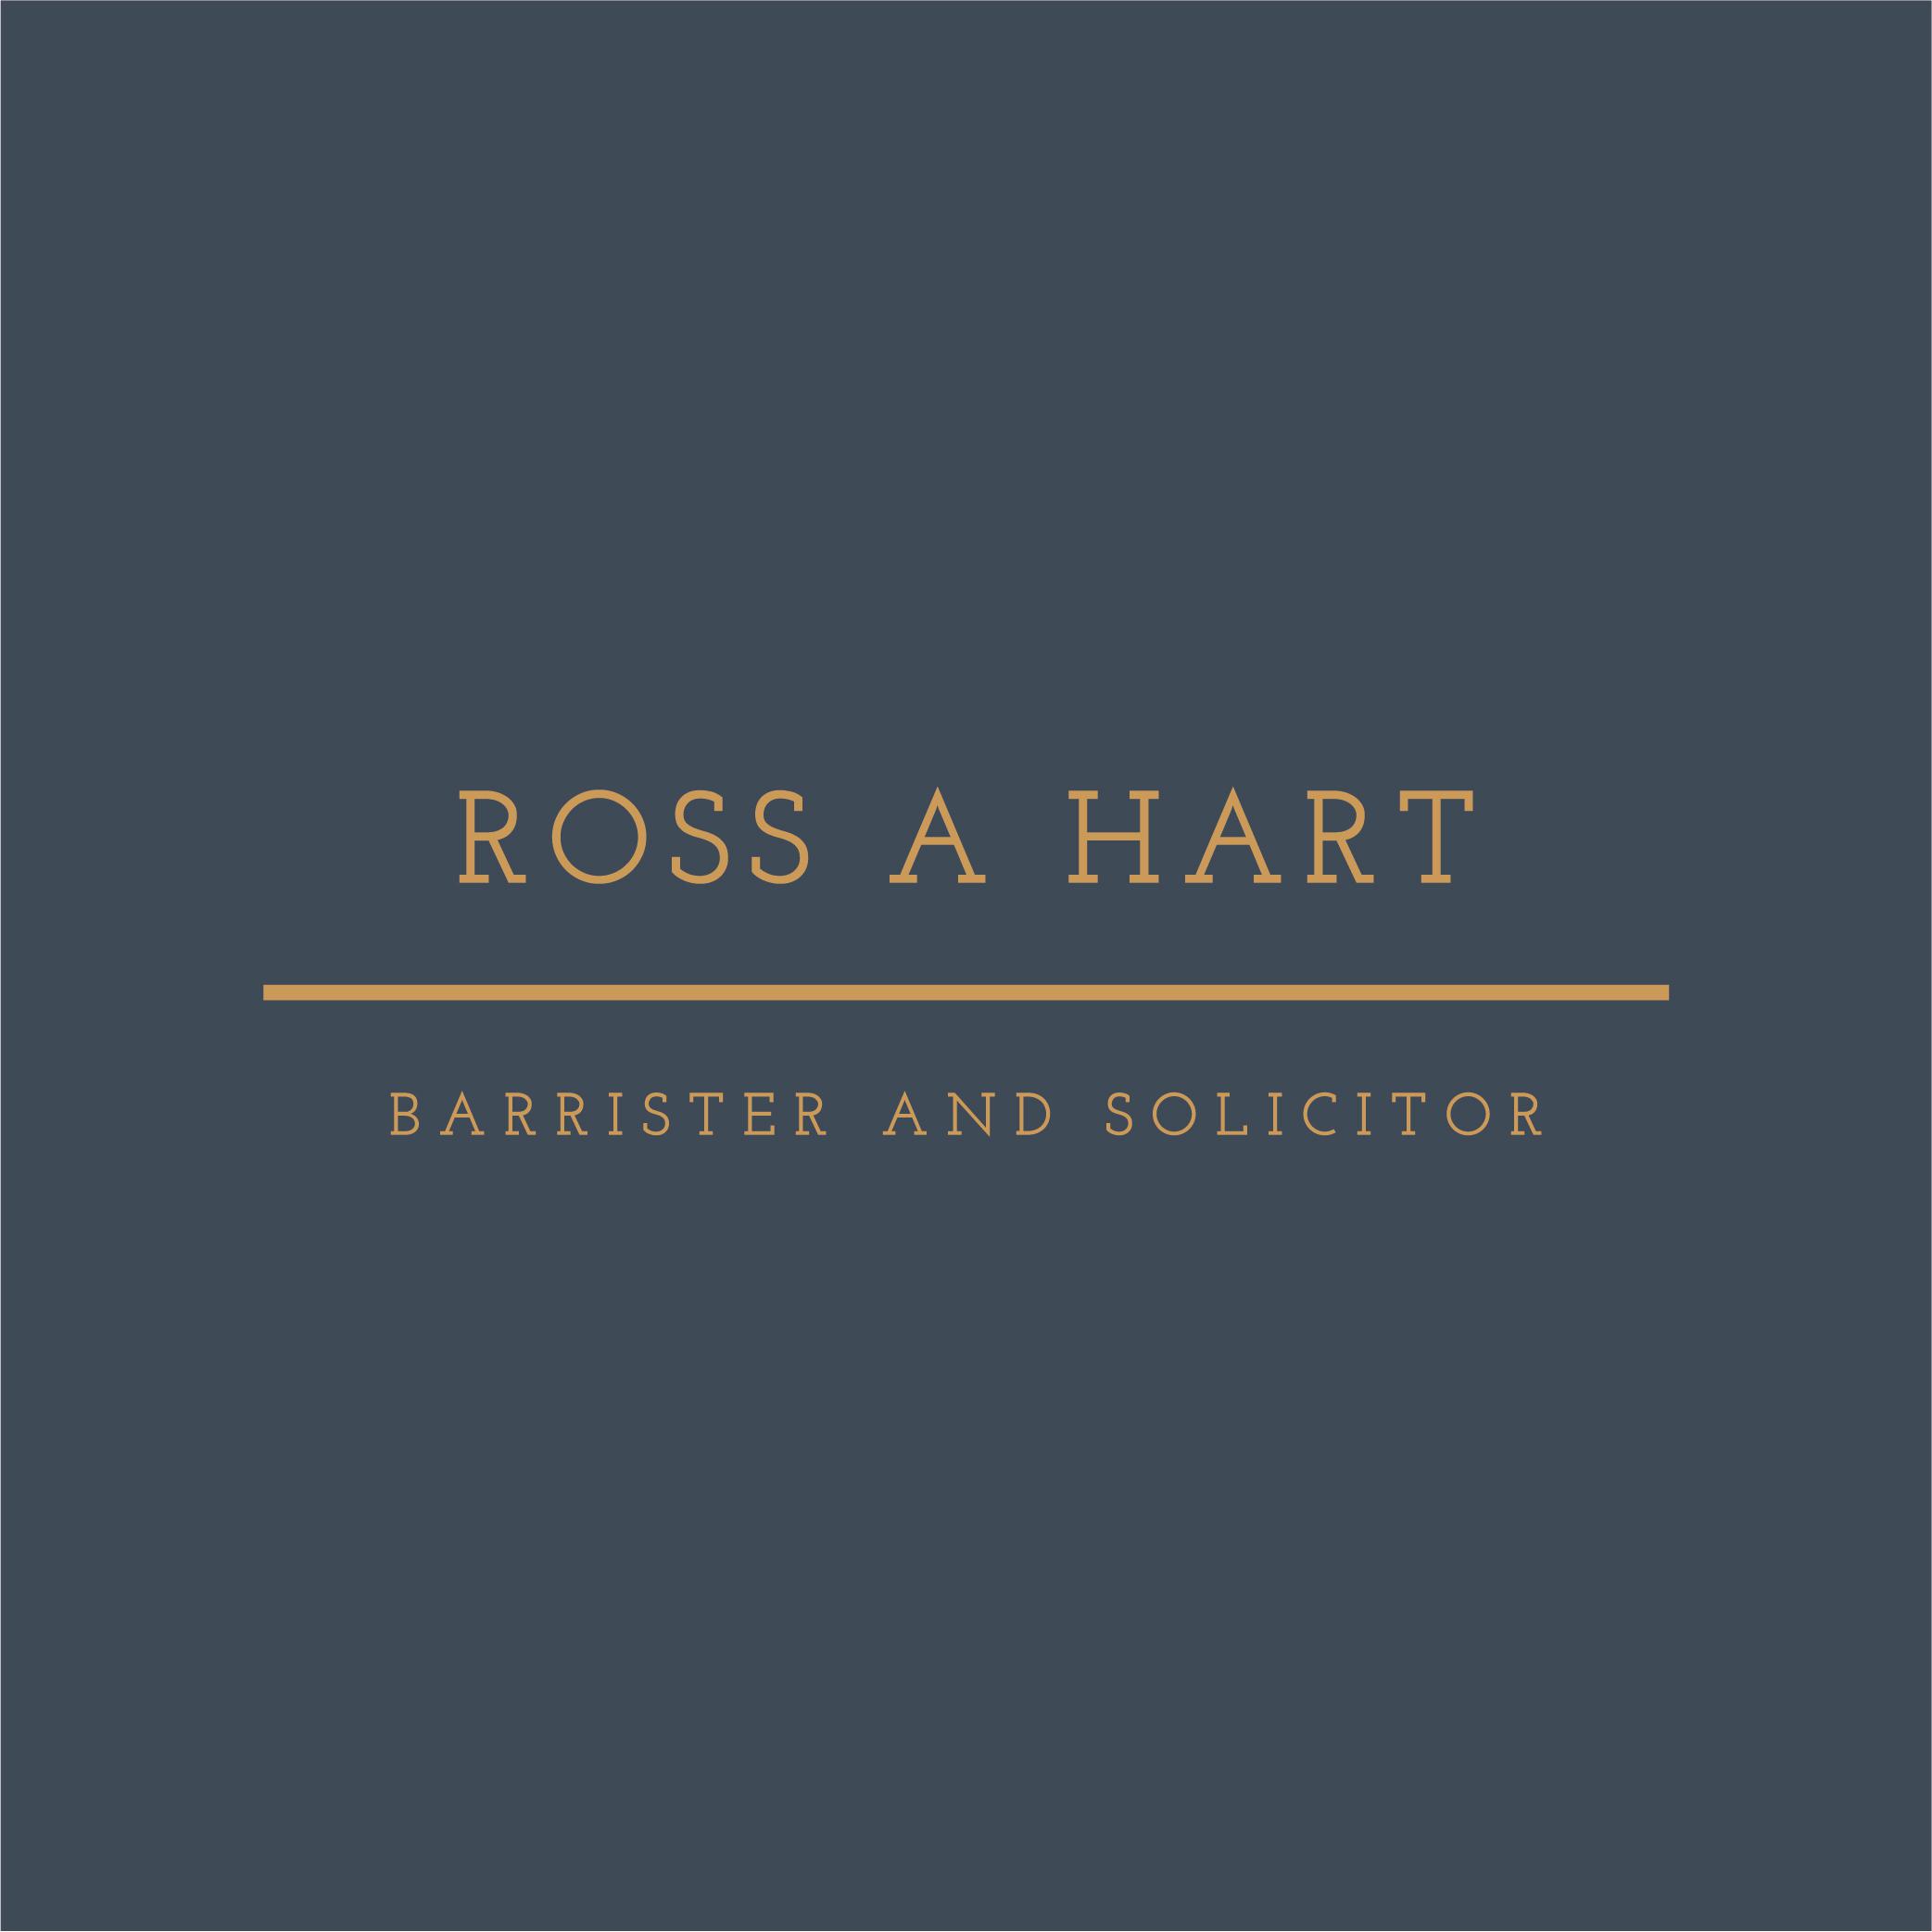 Ross A Hart Barrister and Solicitor - Launceston, TAS 7250 - (03) 6388 9230 | ShowMeLocal.com